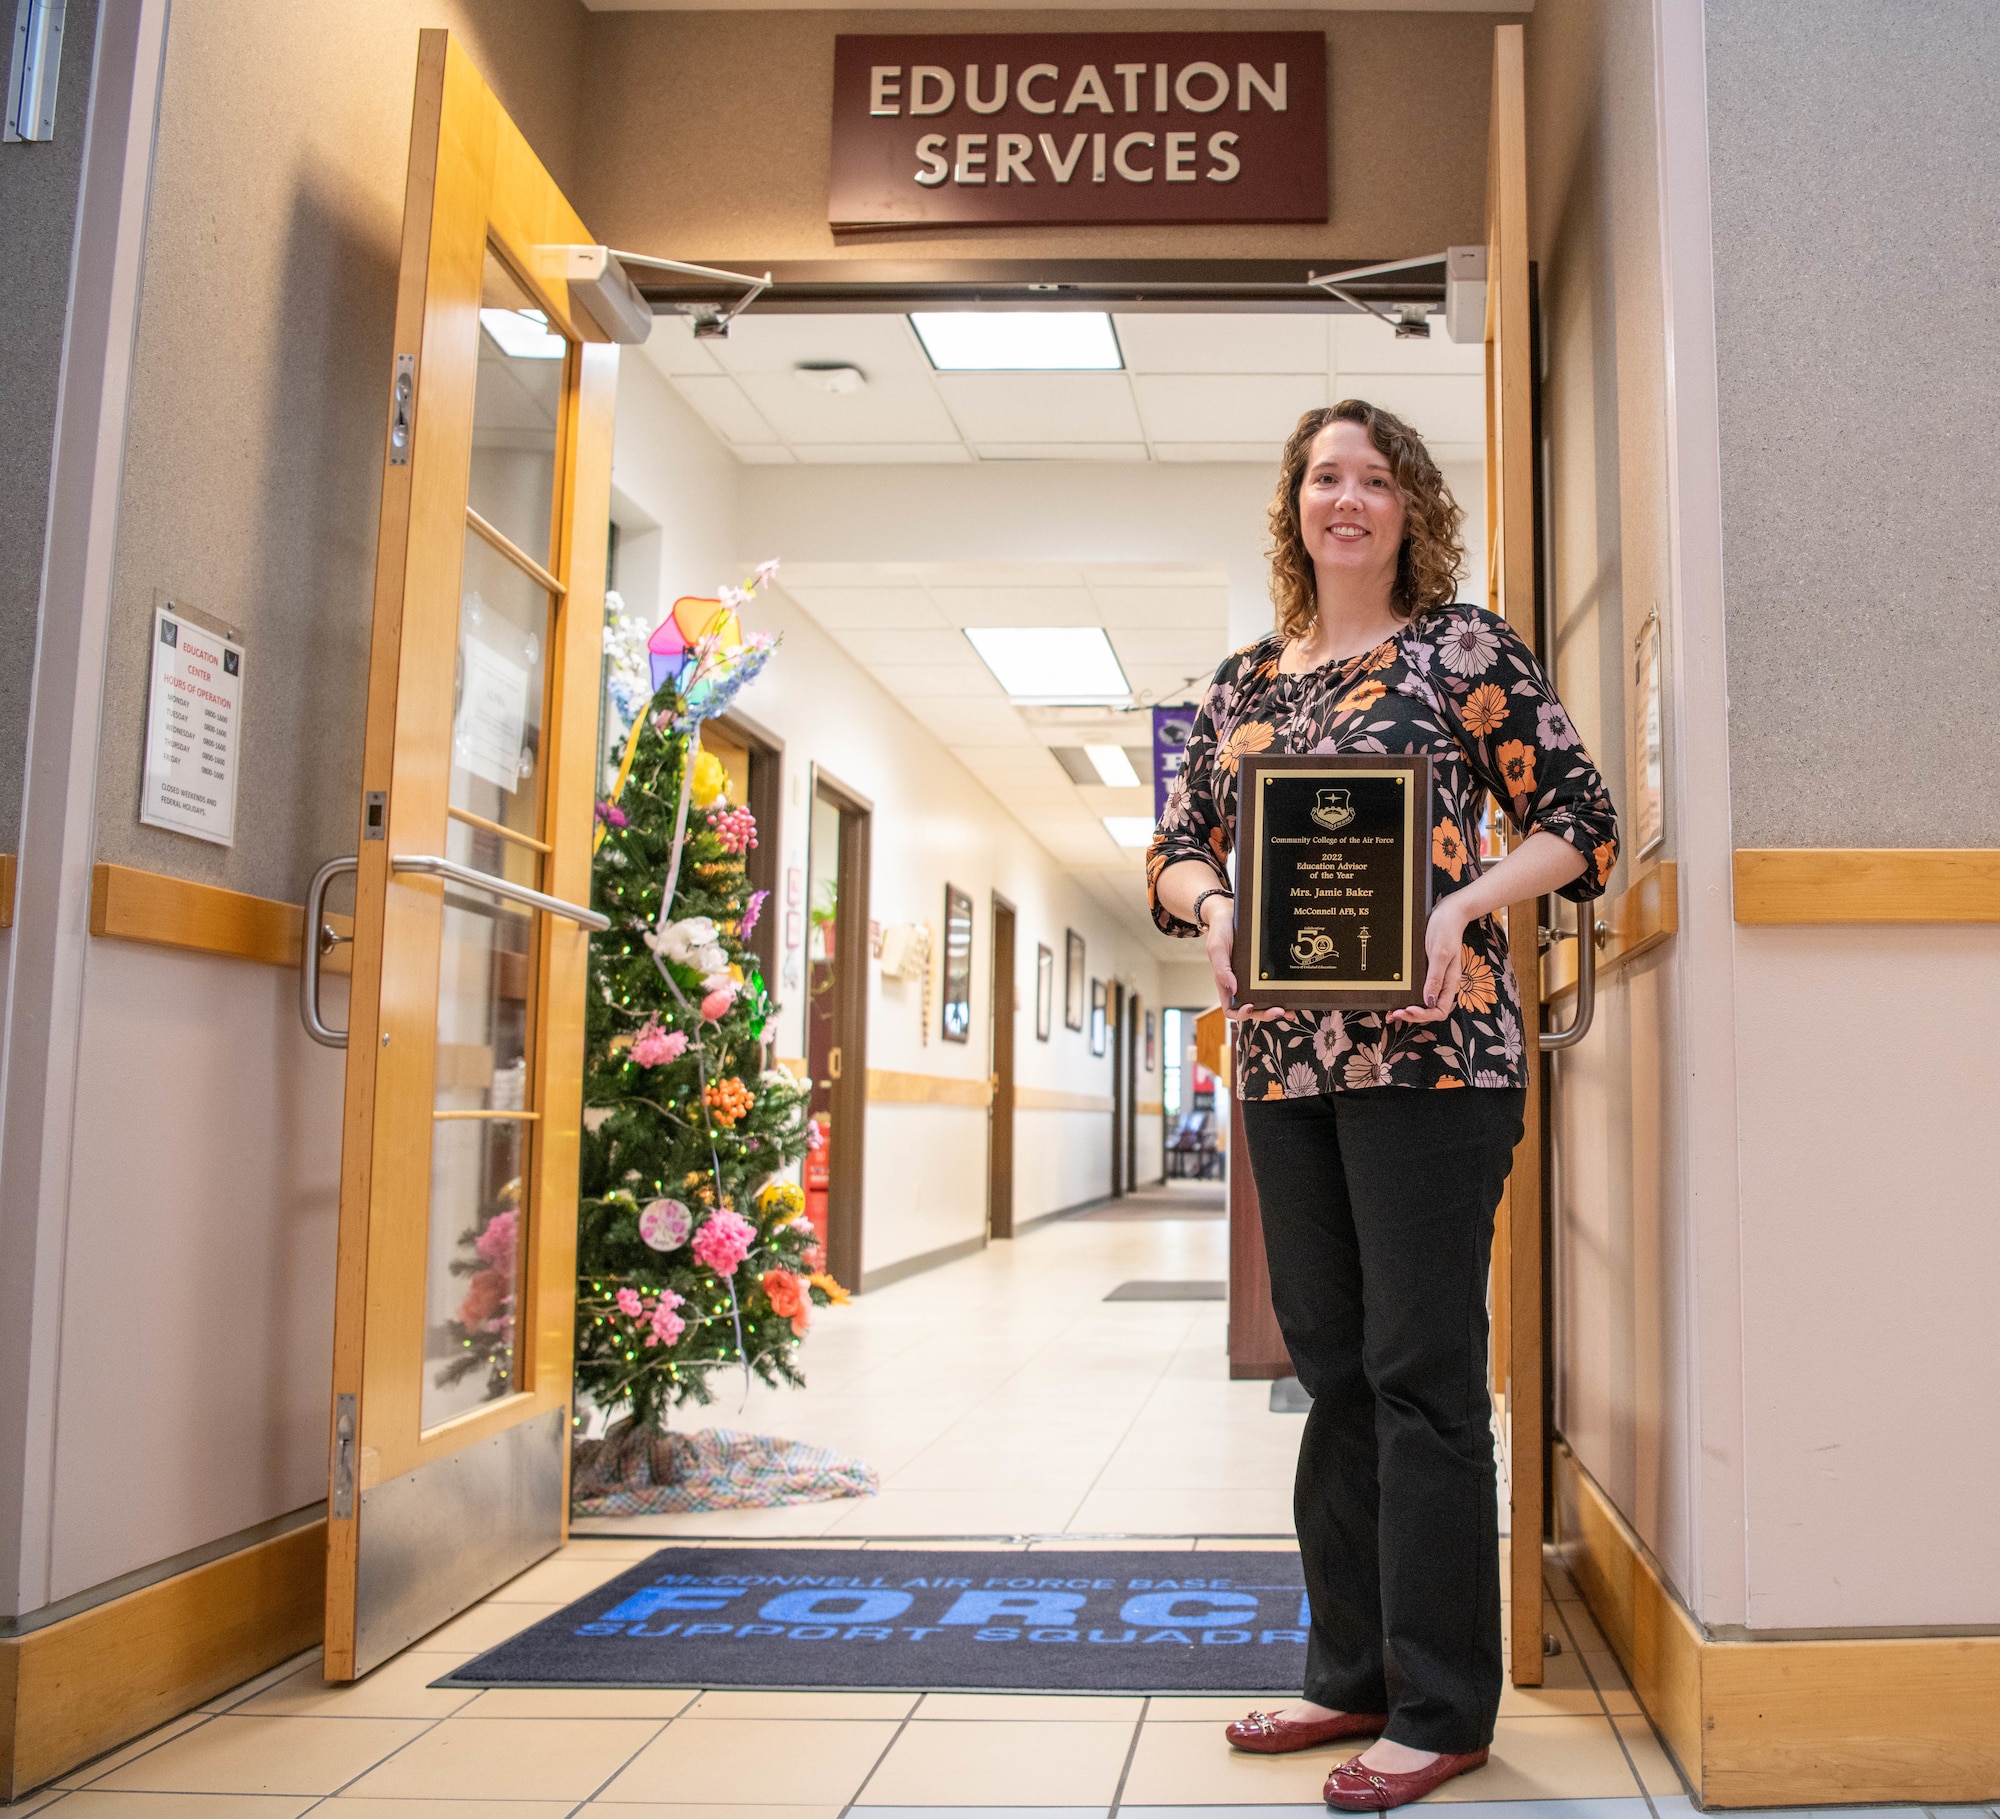 Jamie Baker, 22nd Air Refueling Wing Chief Education and training, poses for a photo with her Community College of the Air Force Advisor of the Year award outside of her office, April 26, 2022 at McConnell Air Force Base, Kanas.